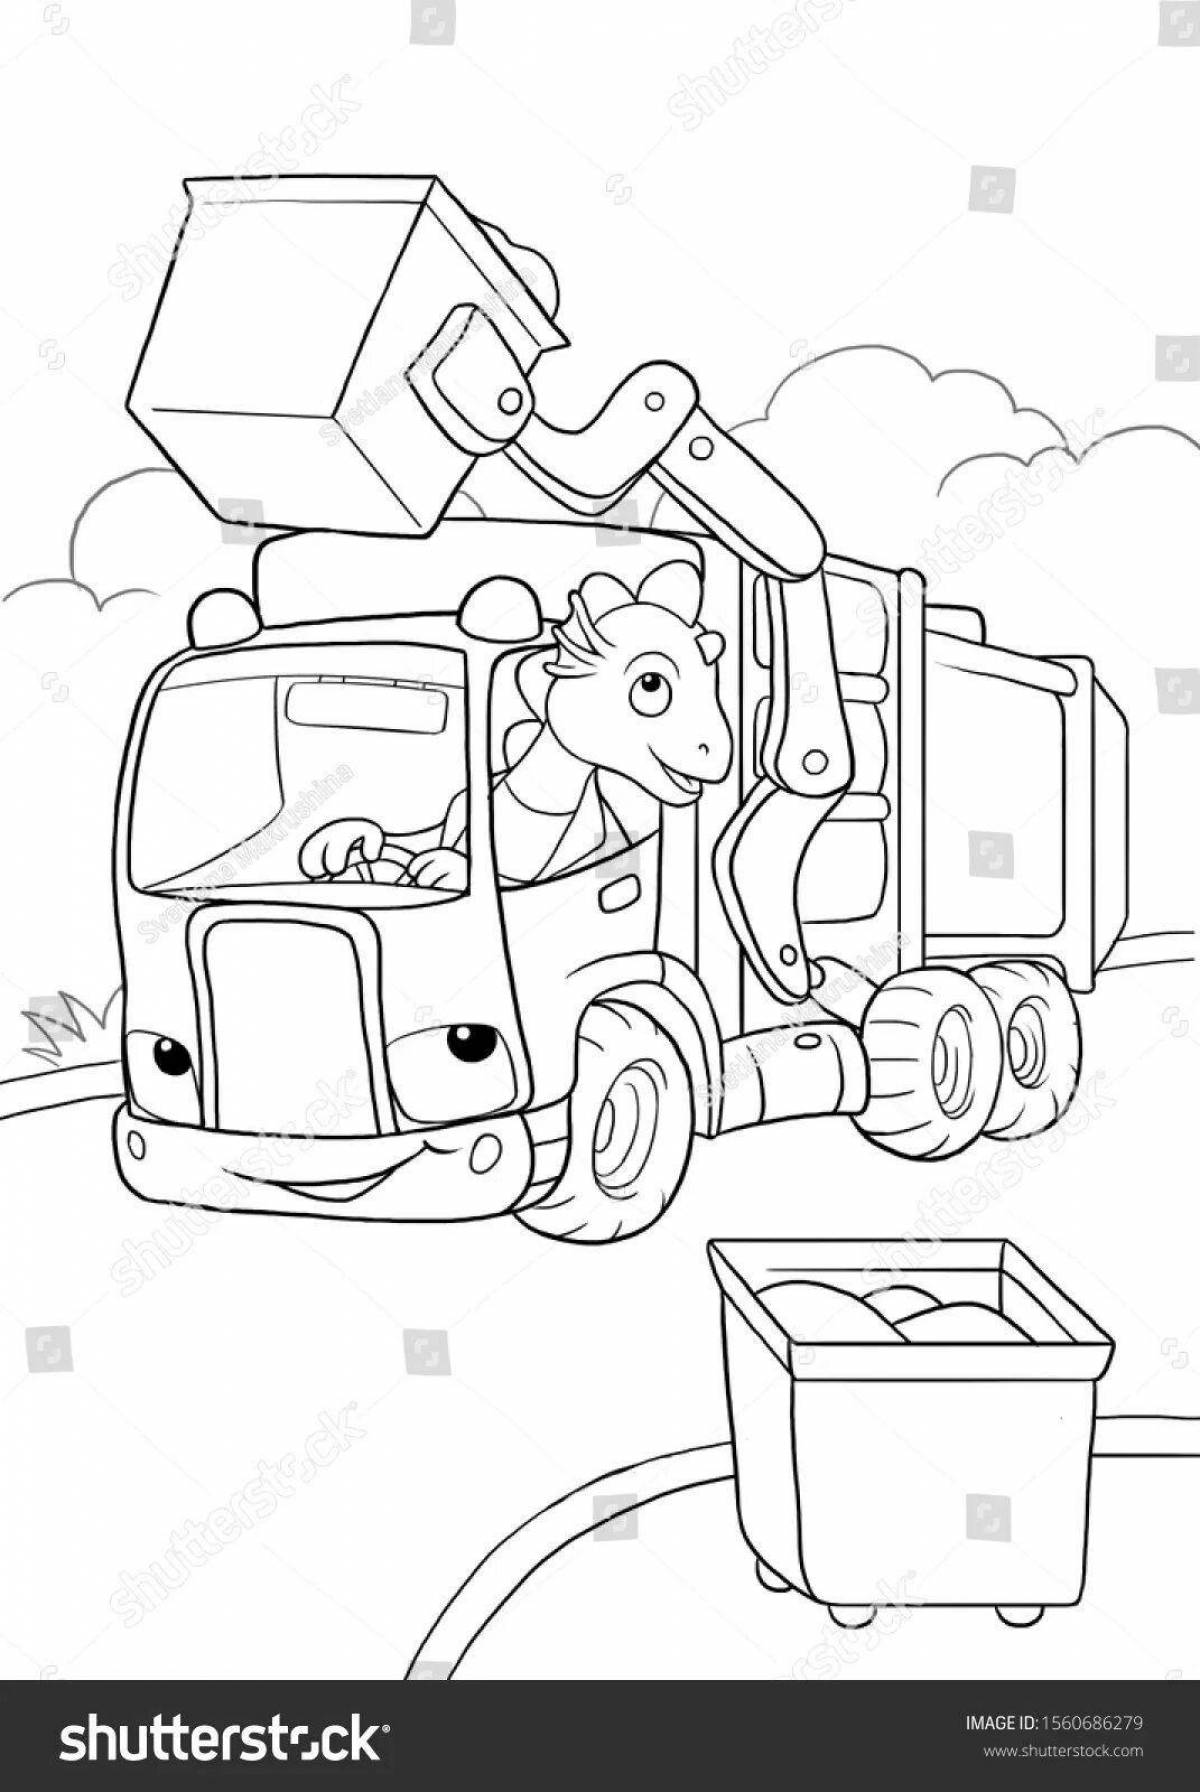 Adorable garbage truck coloring page for 3-4 year olds